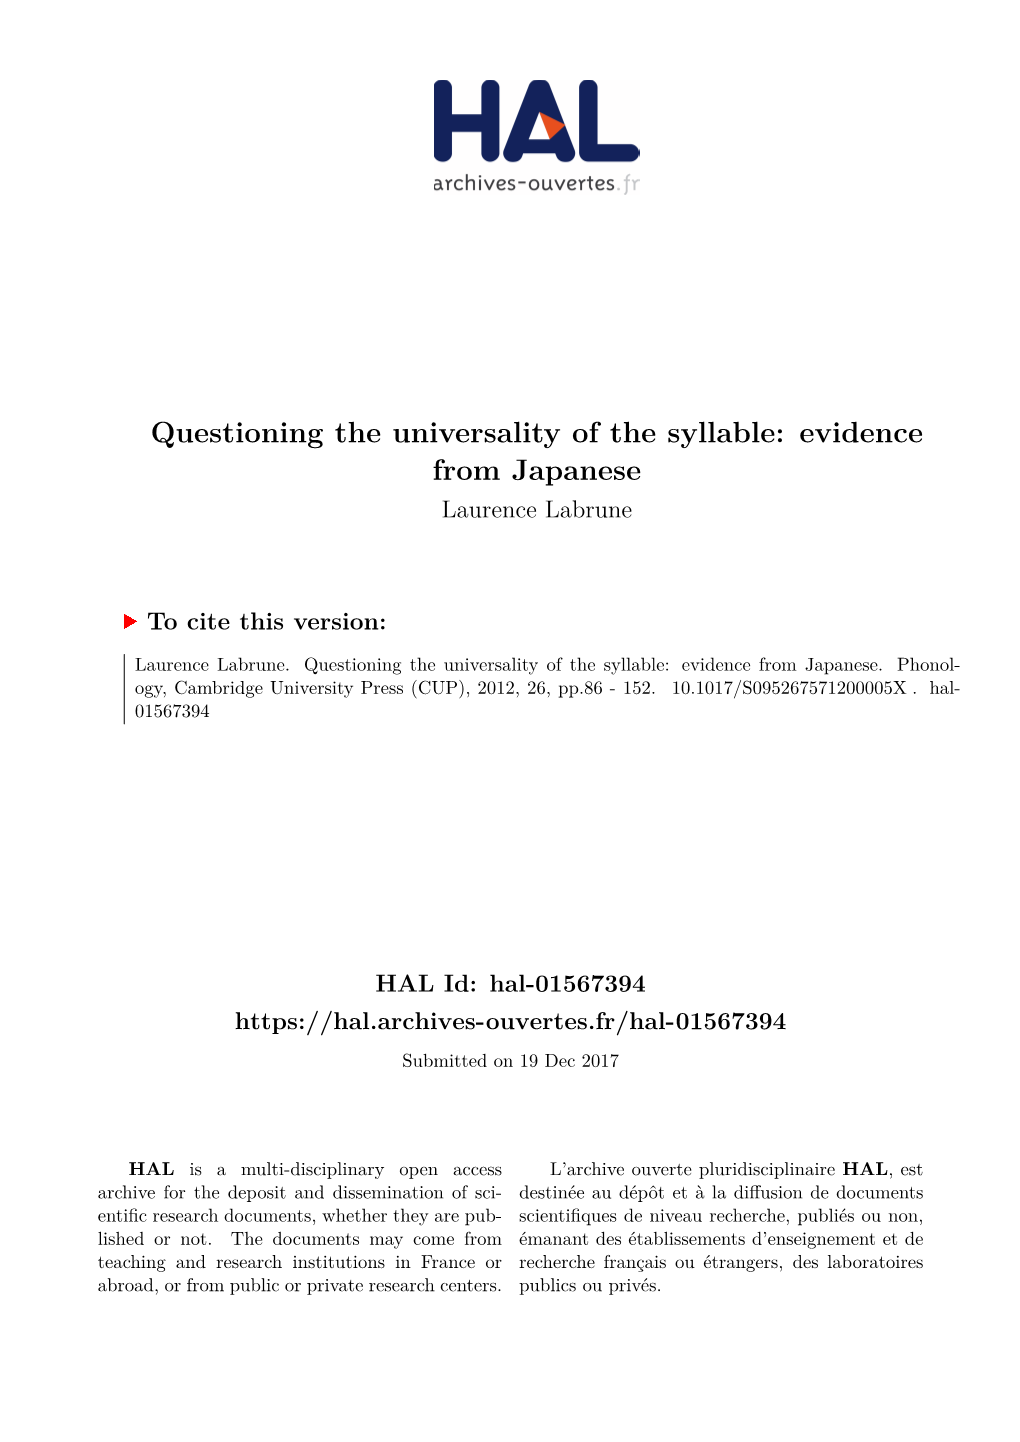 Questioning the Universality of the Syllable: Evidence from Japanese Laurence Labrune